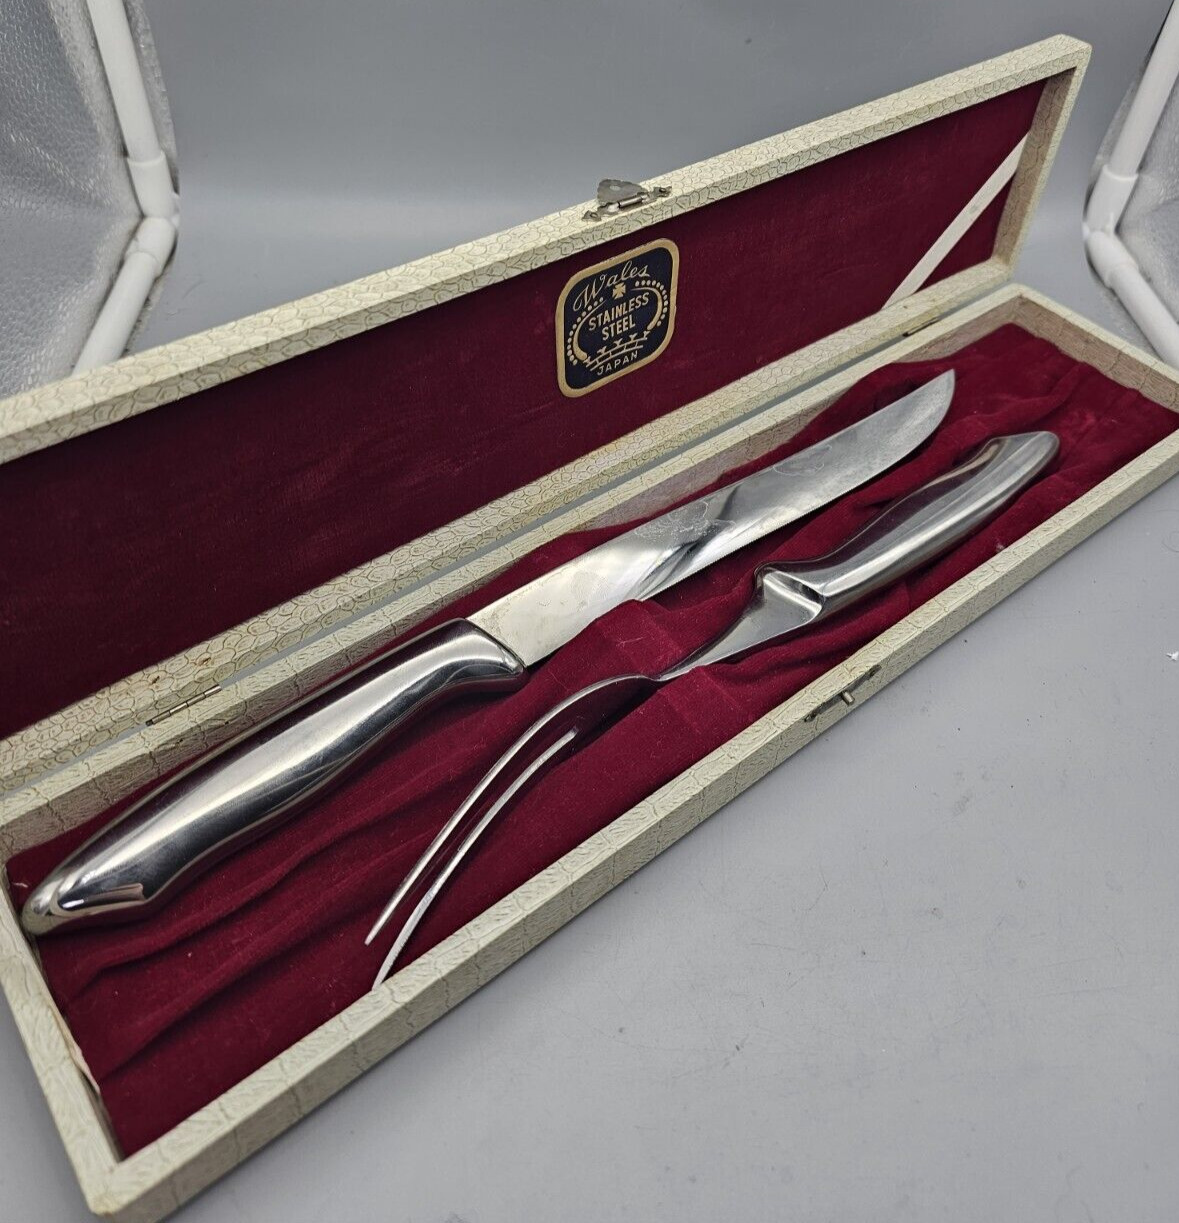 2pc Stainless Steel Carving Set and Presentation Box Japan MCM metallic Chrome